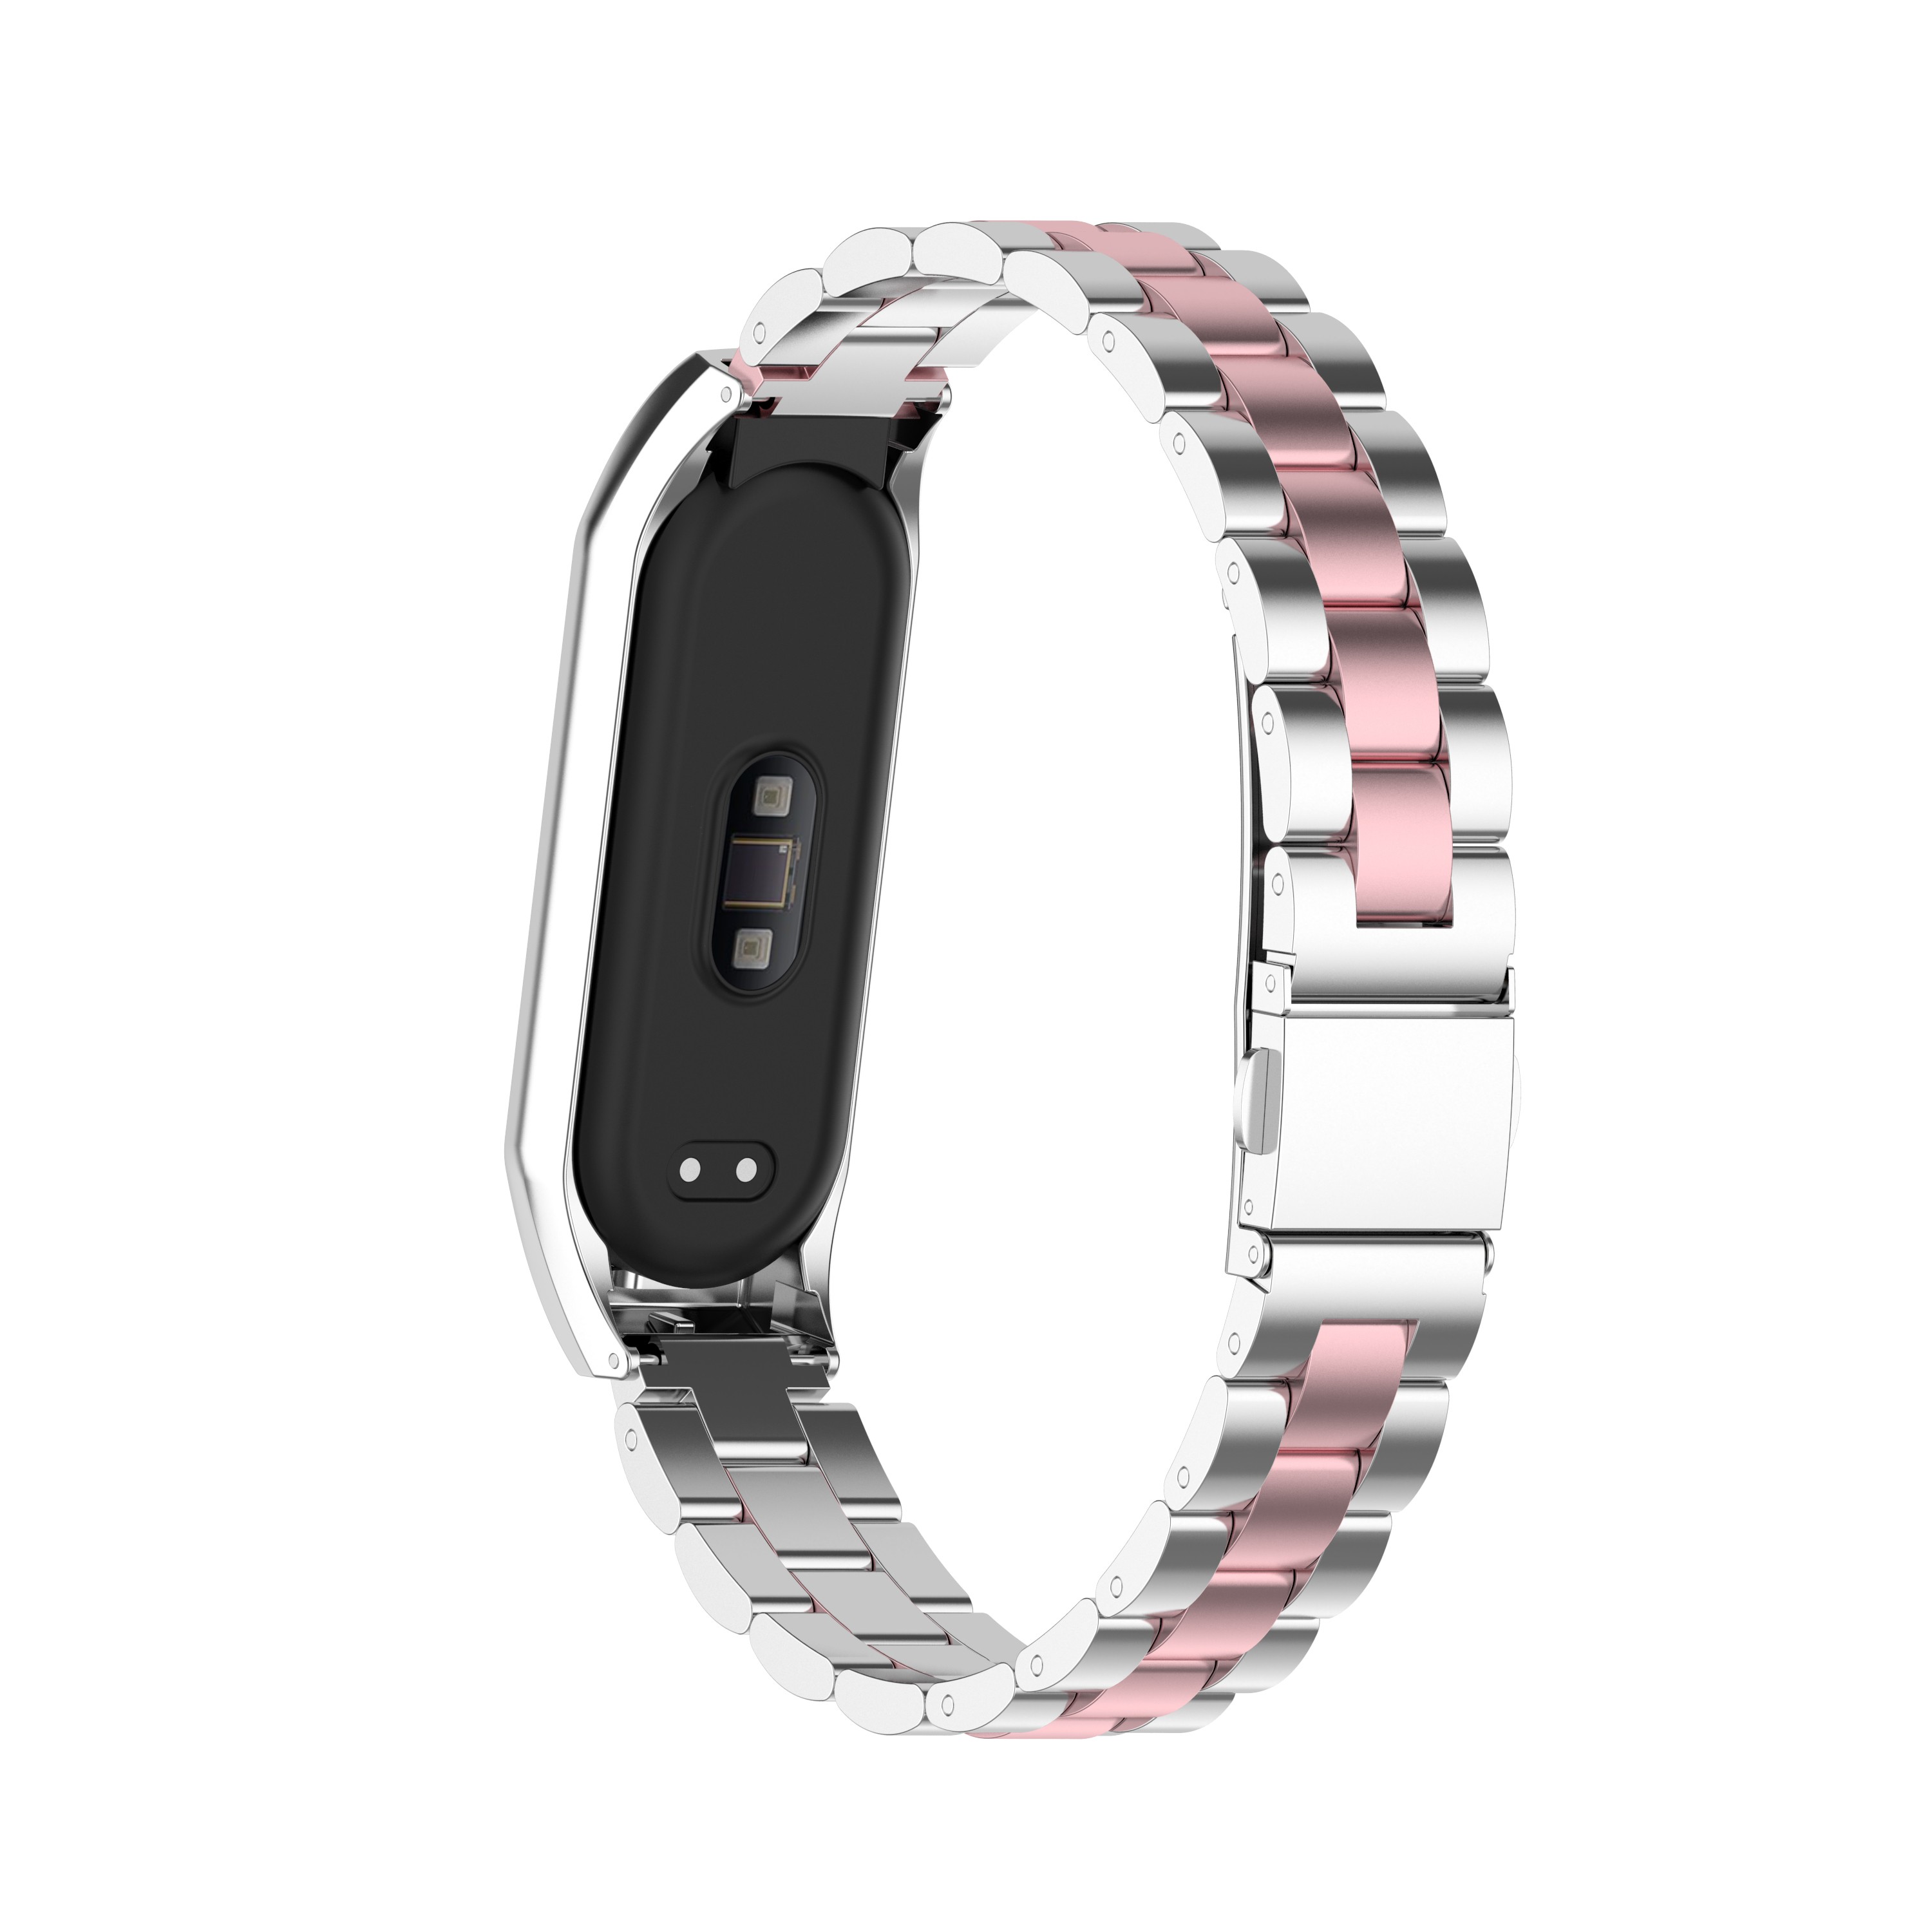 Stainless Steel Metal Strap For Mi Band 6 Xiaomi Mi Band 5 4 3 Band Compatible Bracelet Wristband Mi Band 6 5 4 3 Accessories